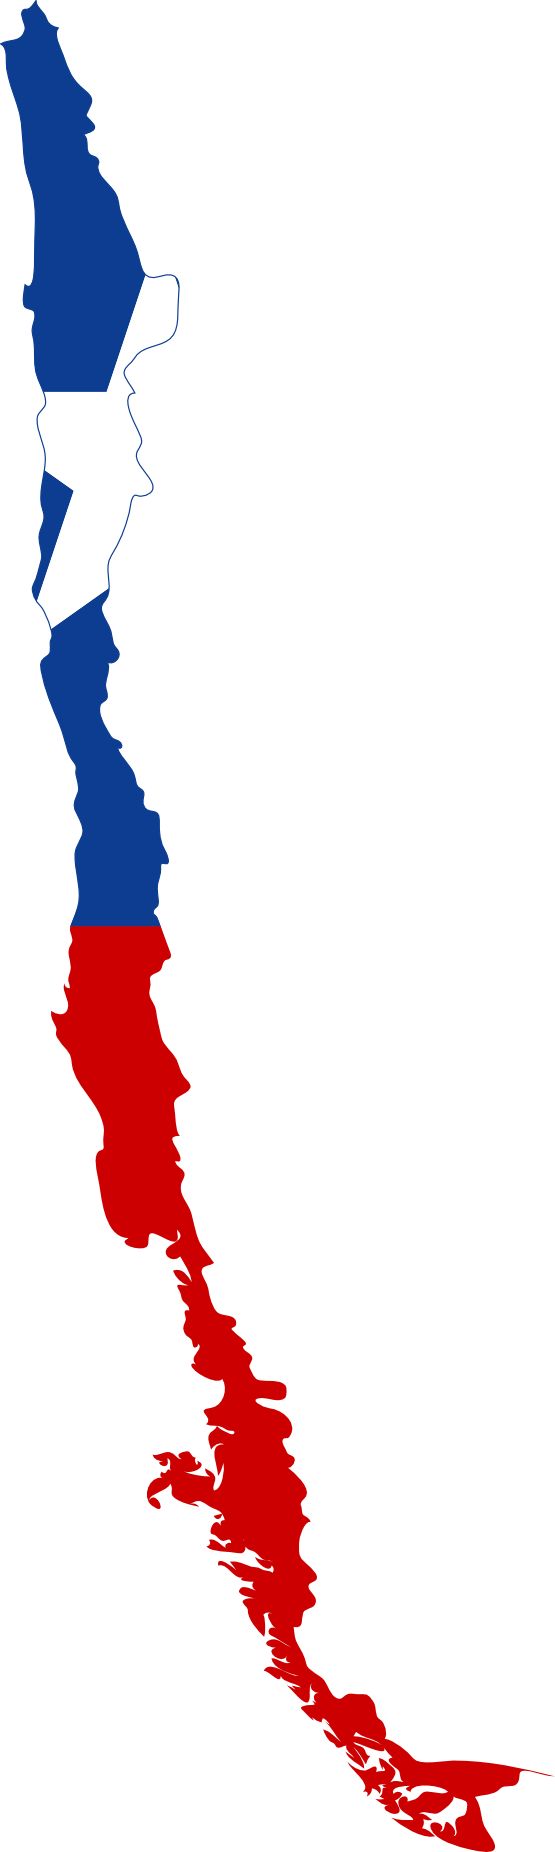 Chile svg #19, Download drawings